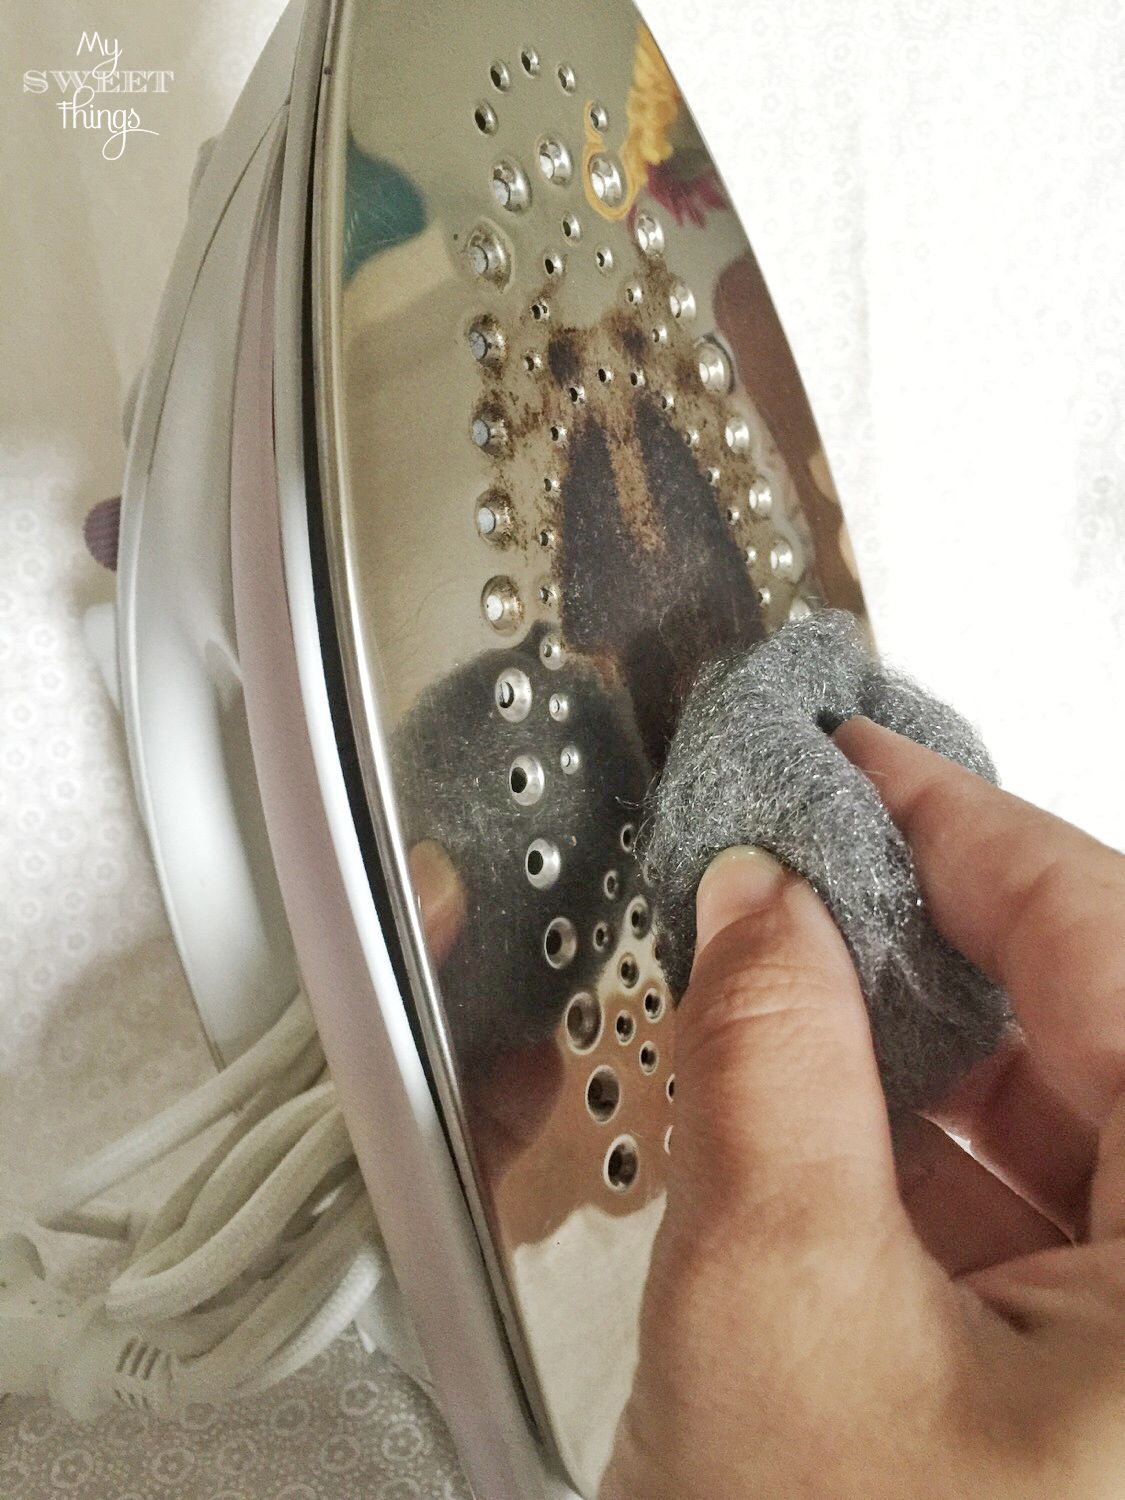 How to clean an iron easily with steel wool · Via www.sweethings.net